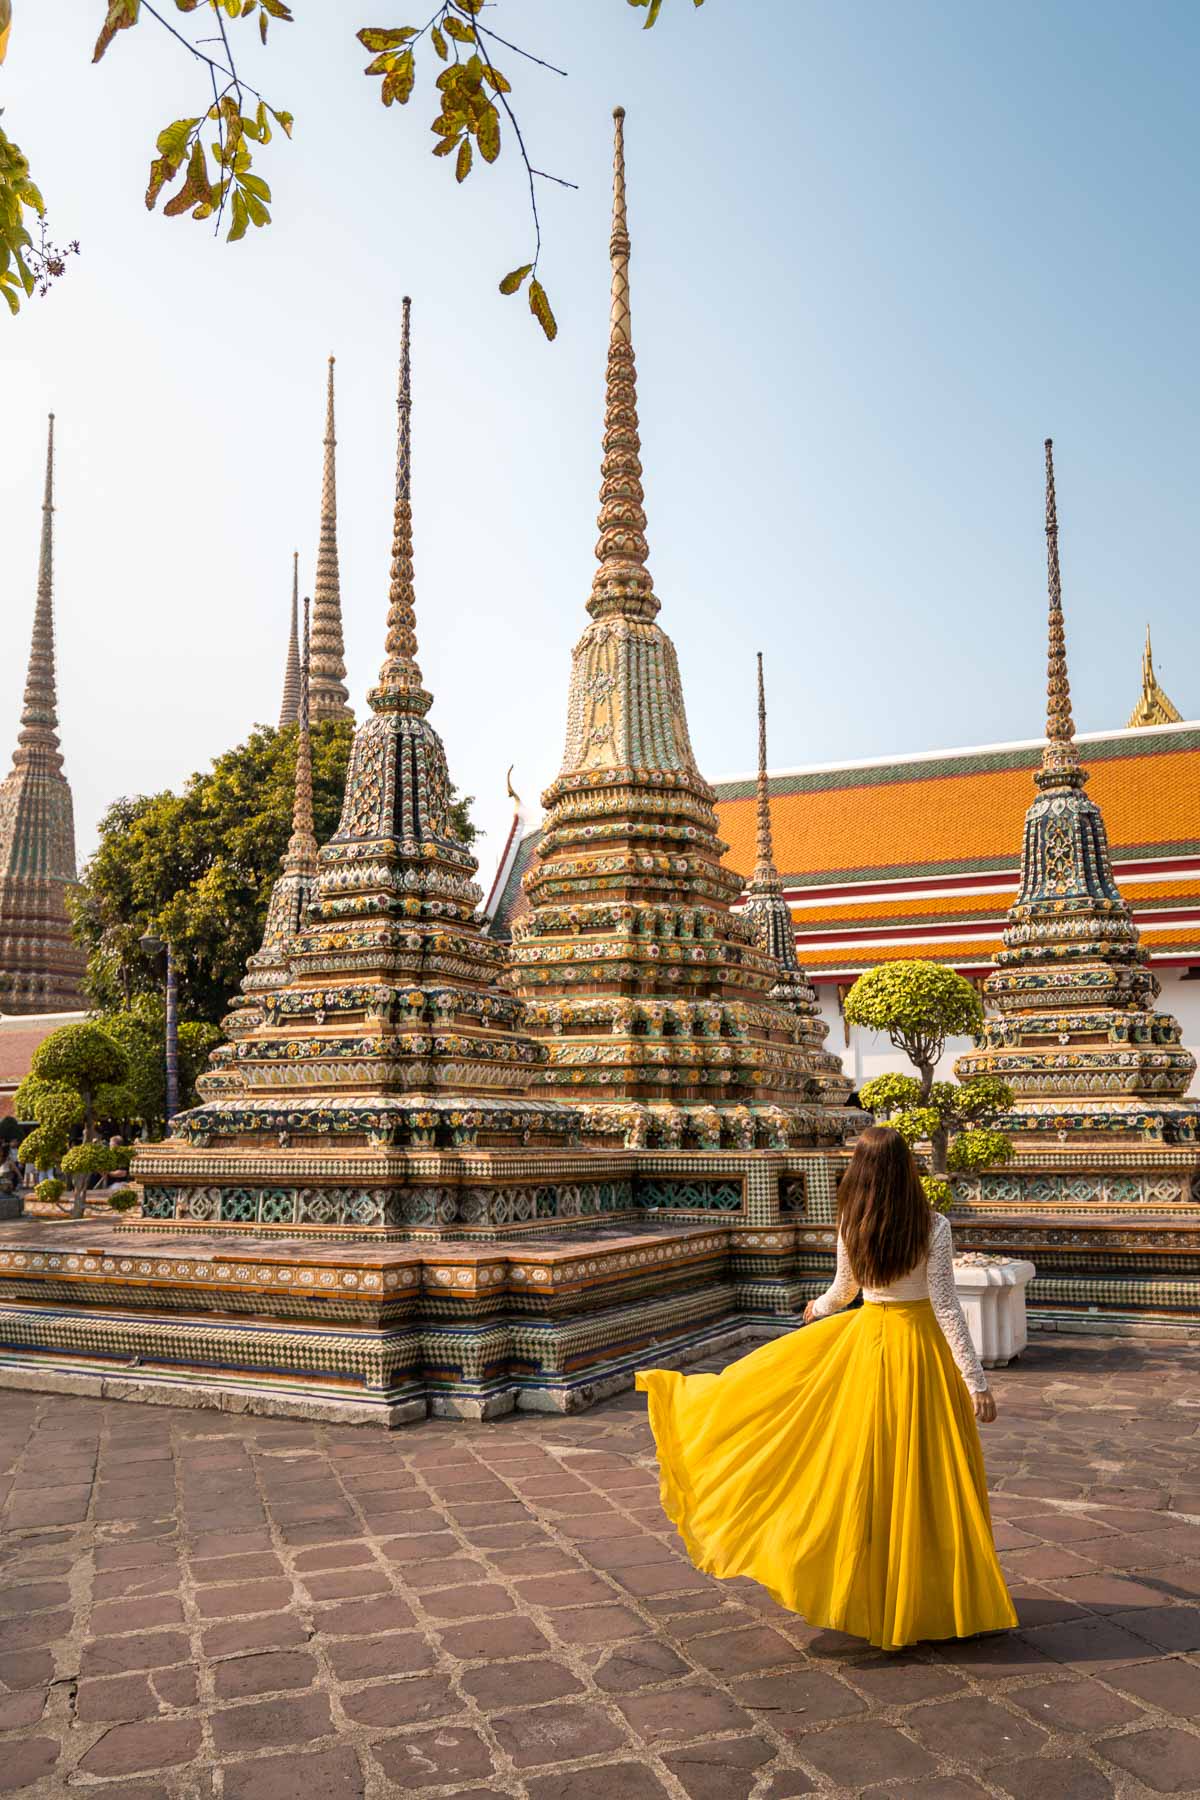 Girl in a yellow dress standing in front of the beautifully decorated stupas at the Wat Pho in Bangkok